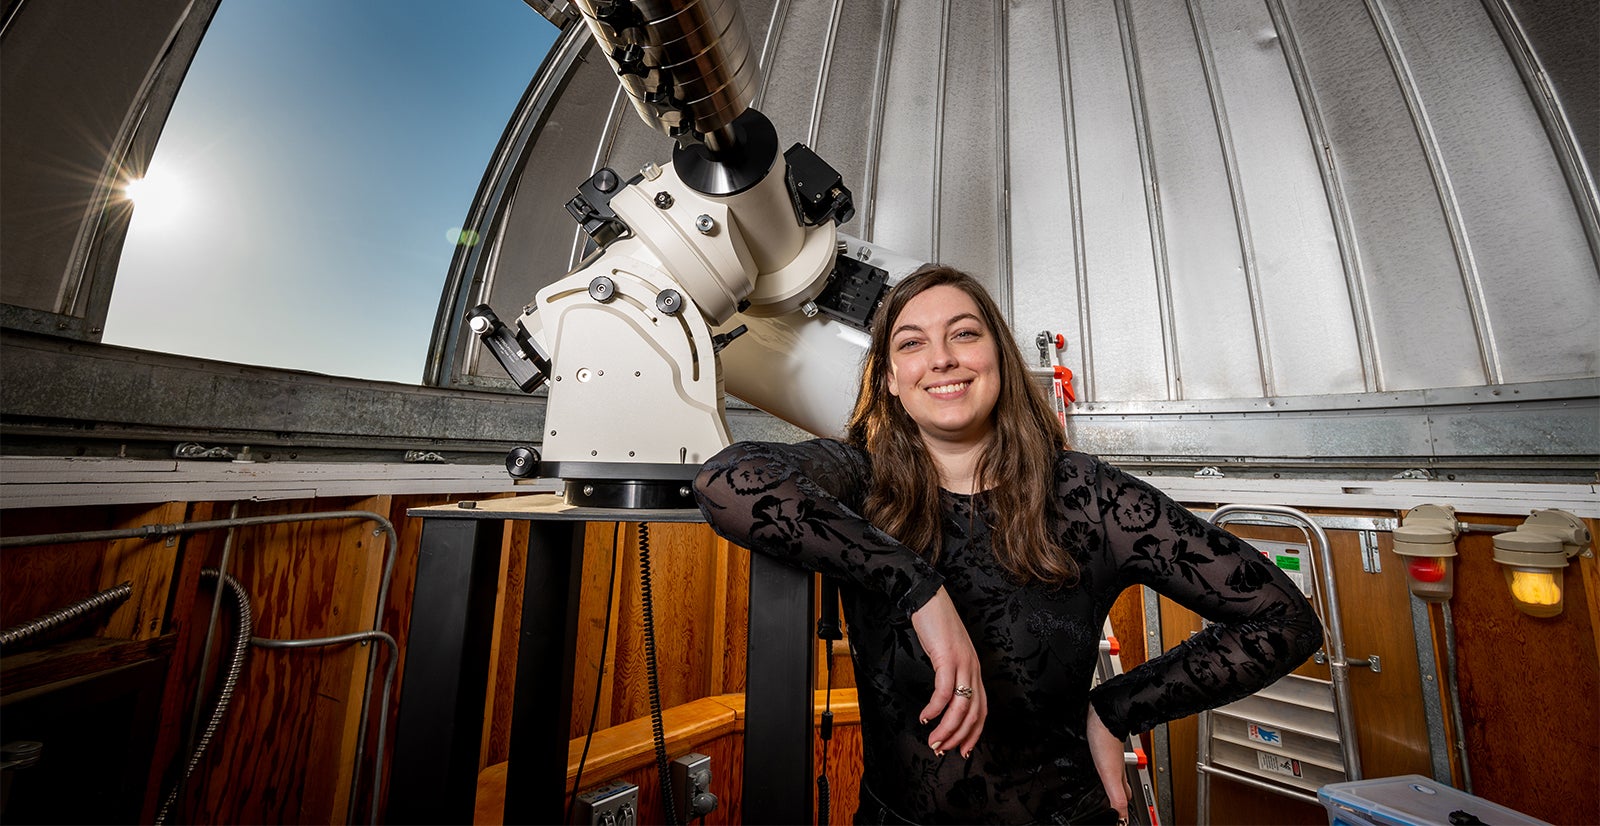 Ciera Partyka-Worley )seeking a physics degree with an astrophysics emphasis) at the observatory, for Focus/Boise State Magazine, photo by Priscilla Grover